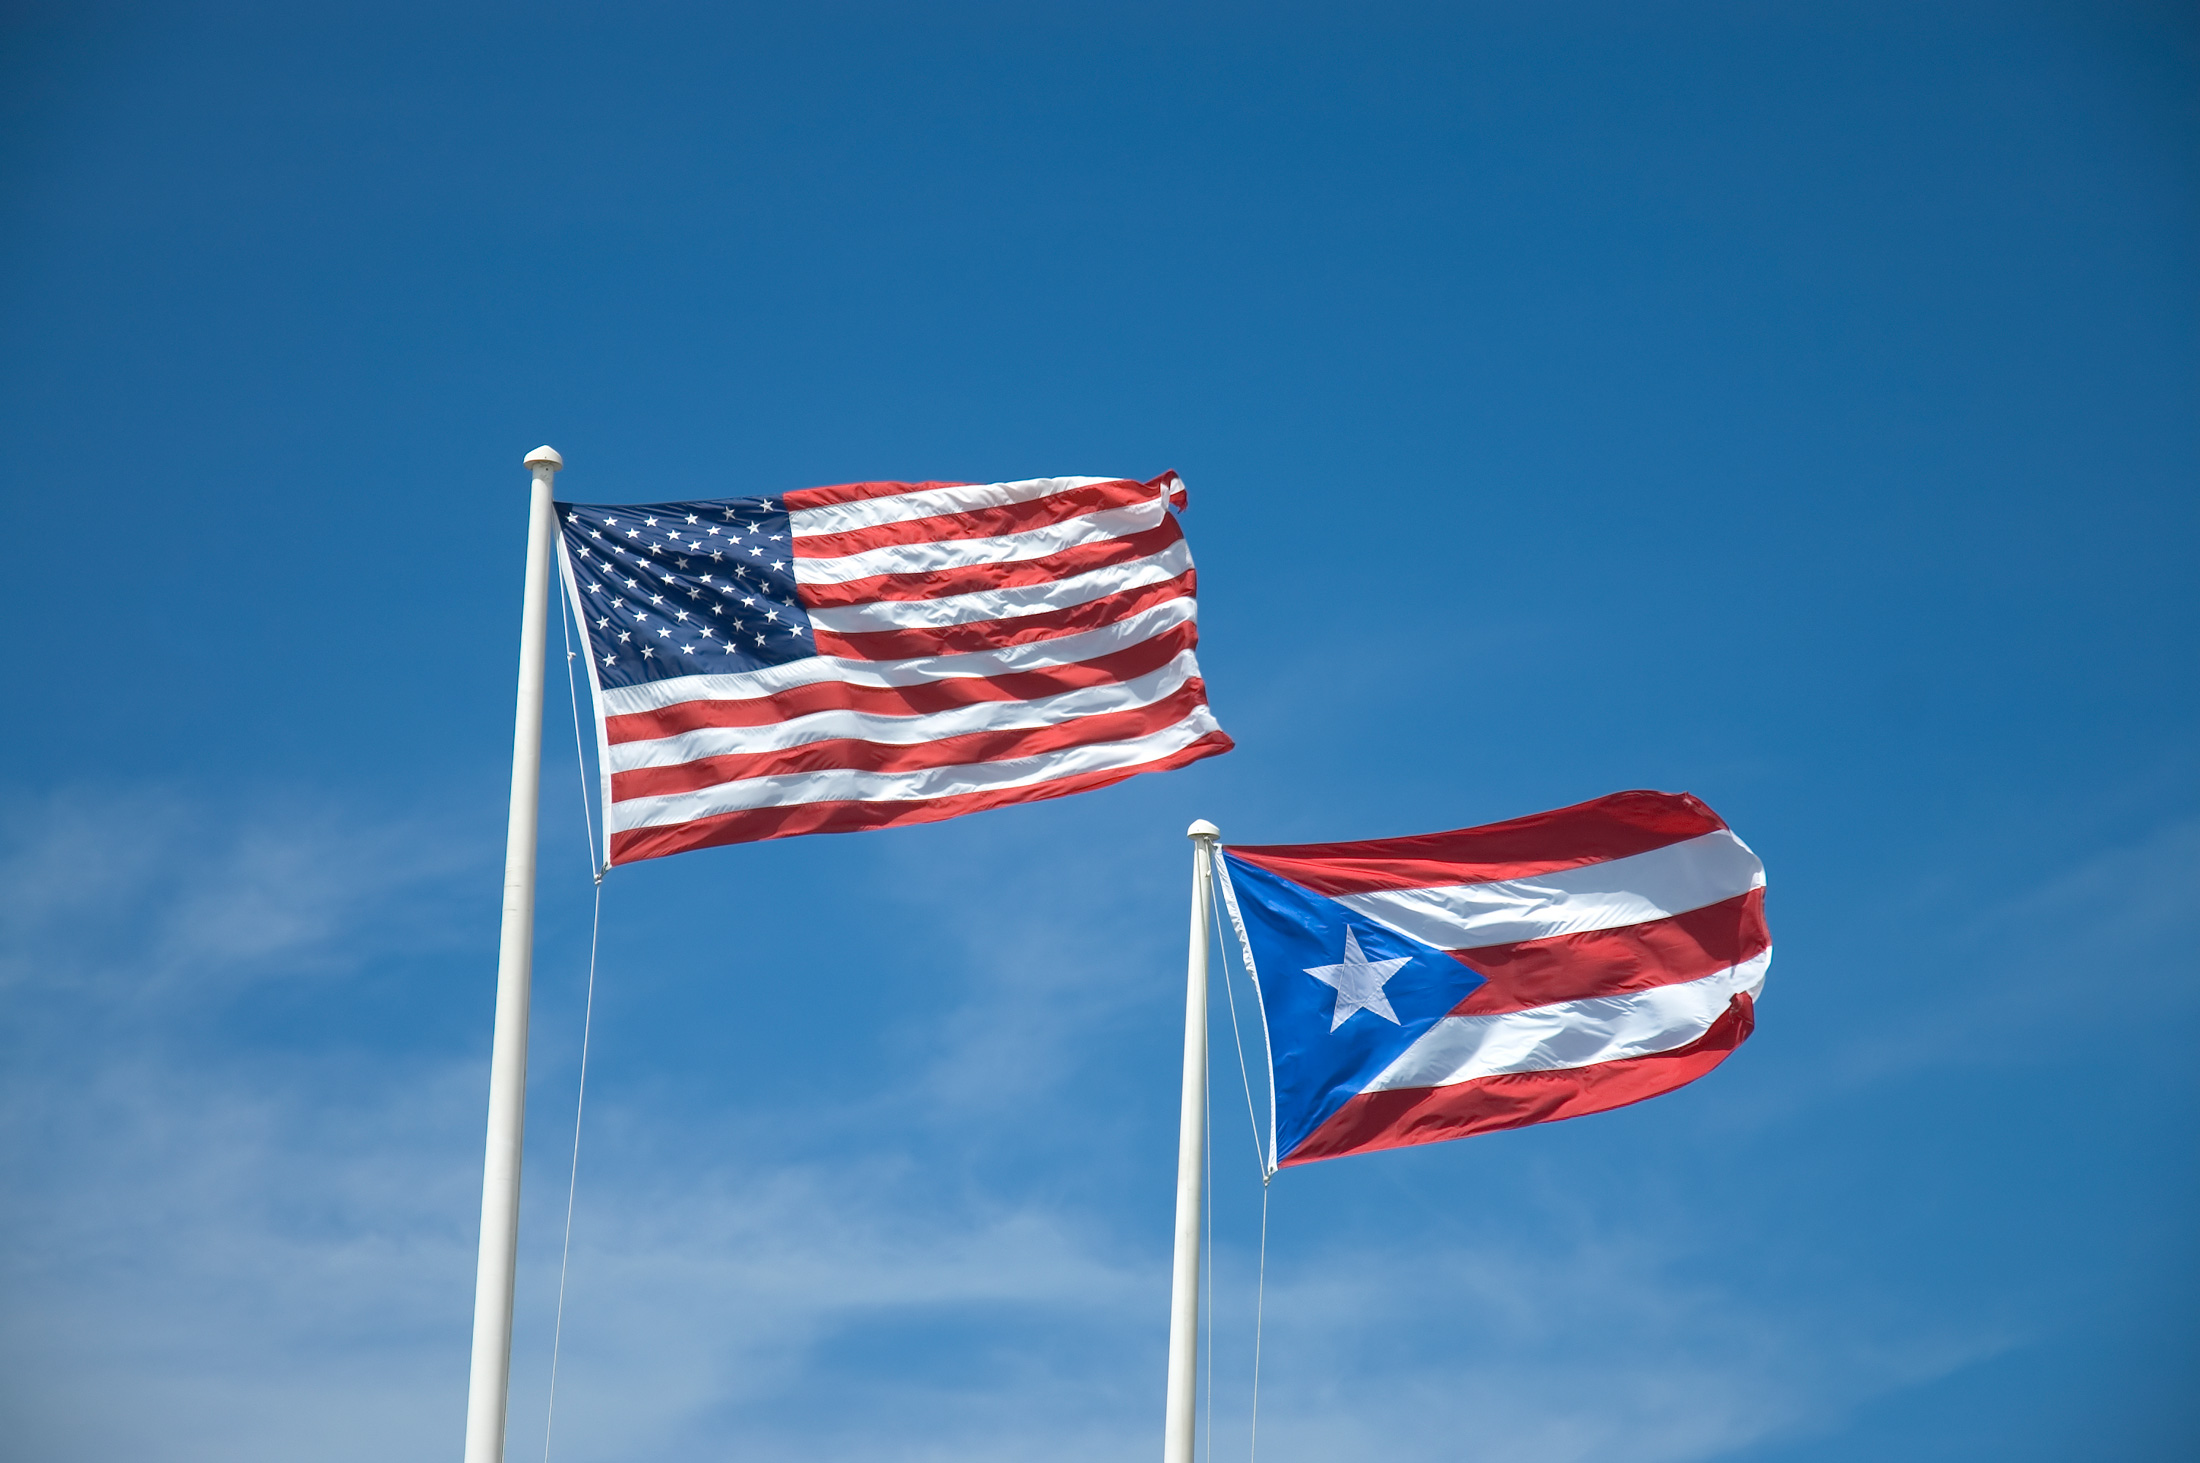 Why Puerto Rico Is Adding 'USA' to Its Driver's Licenses - The New